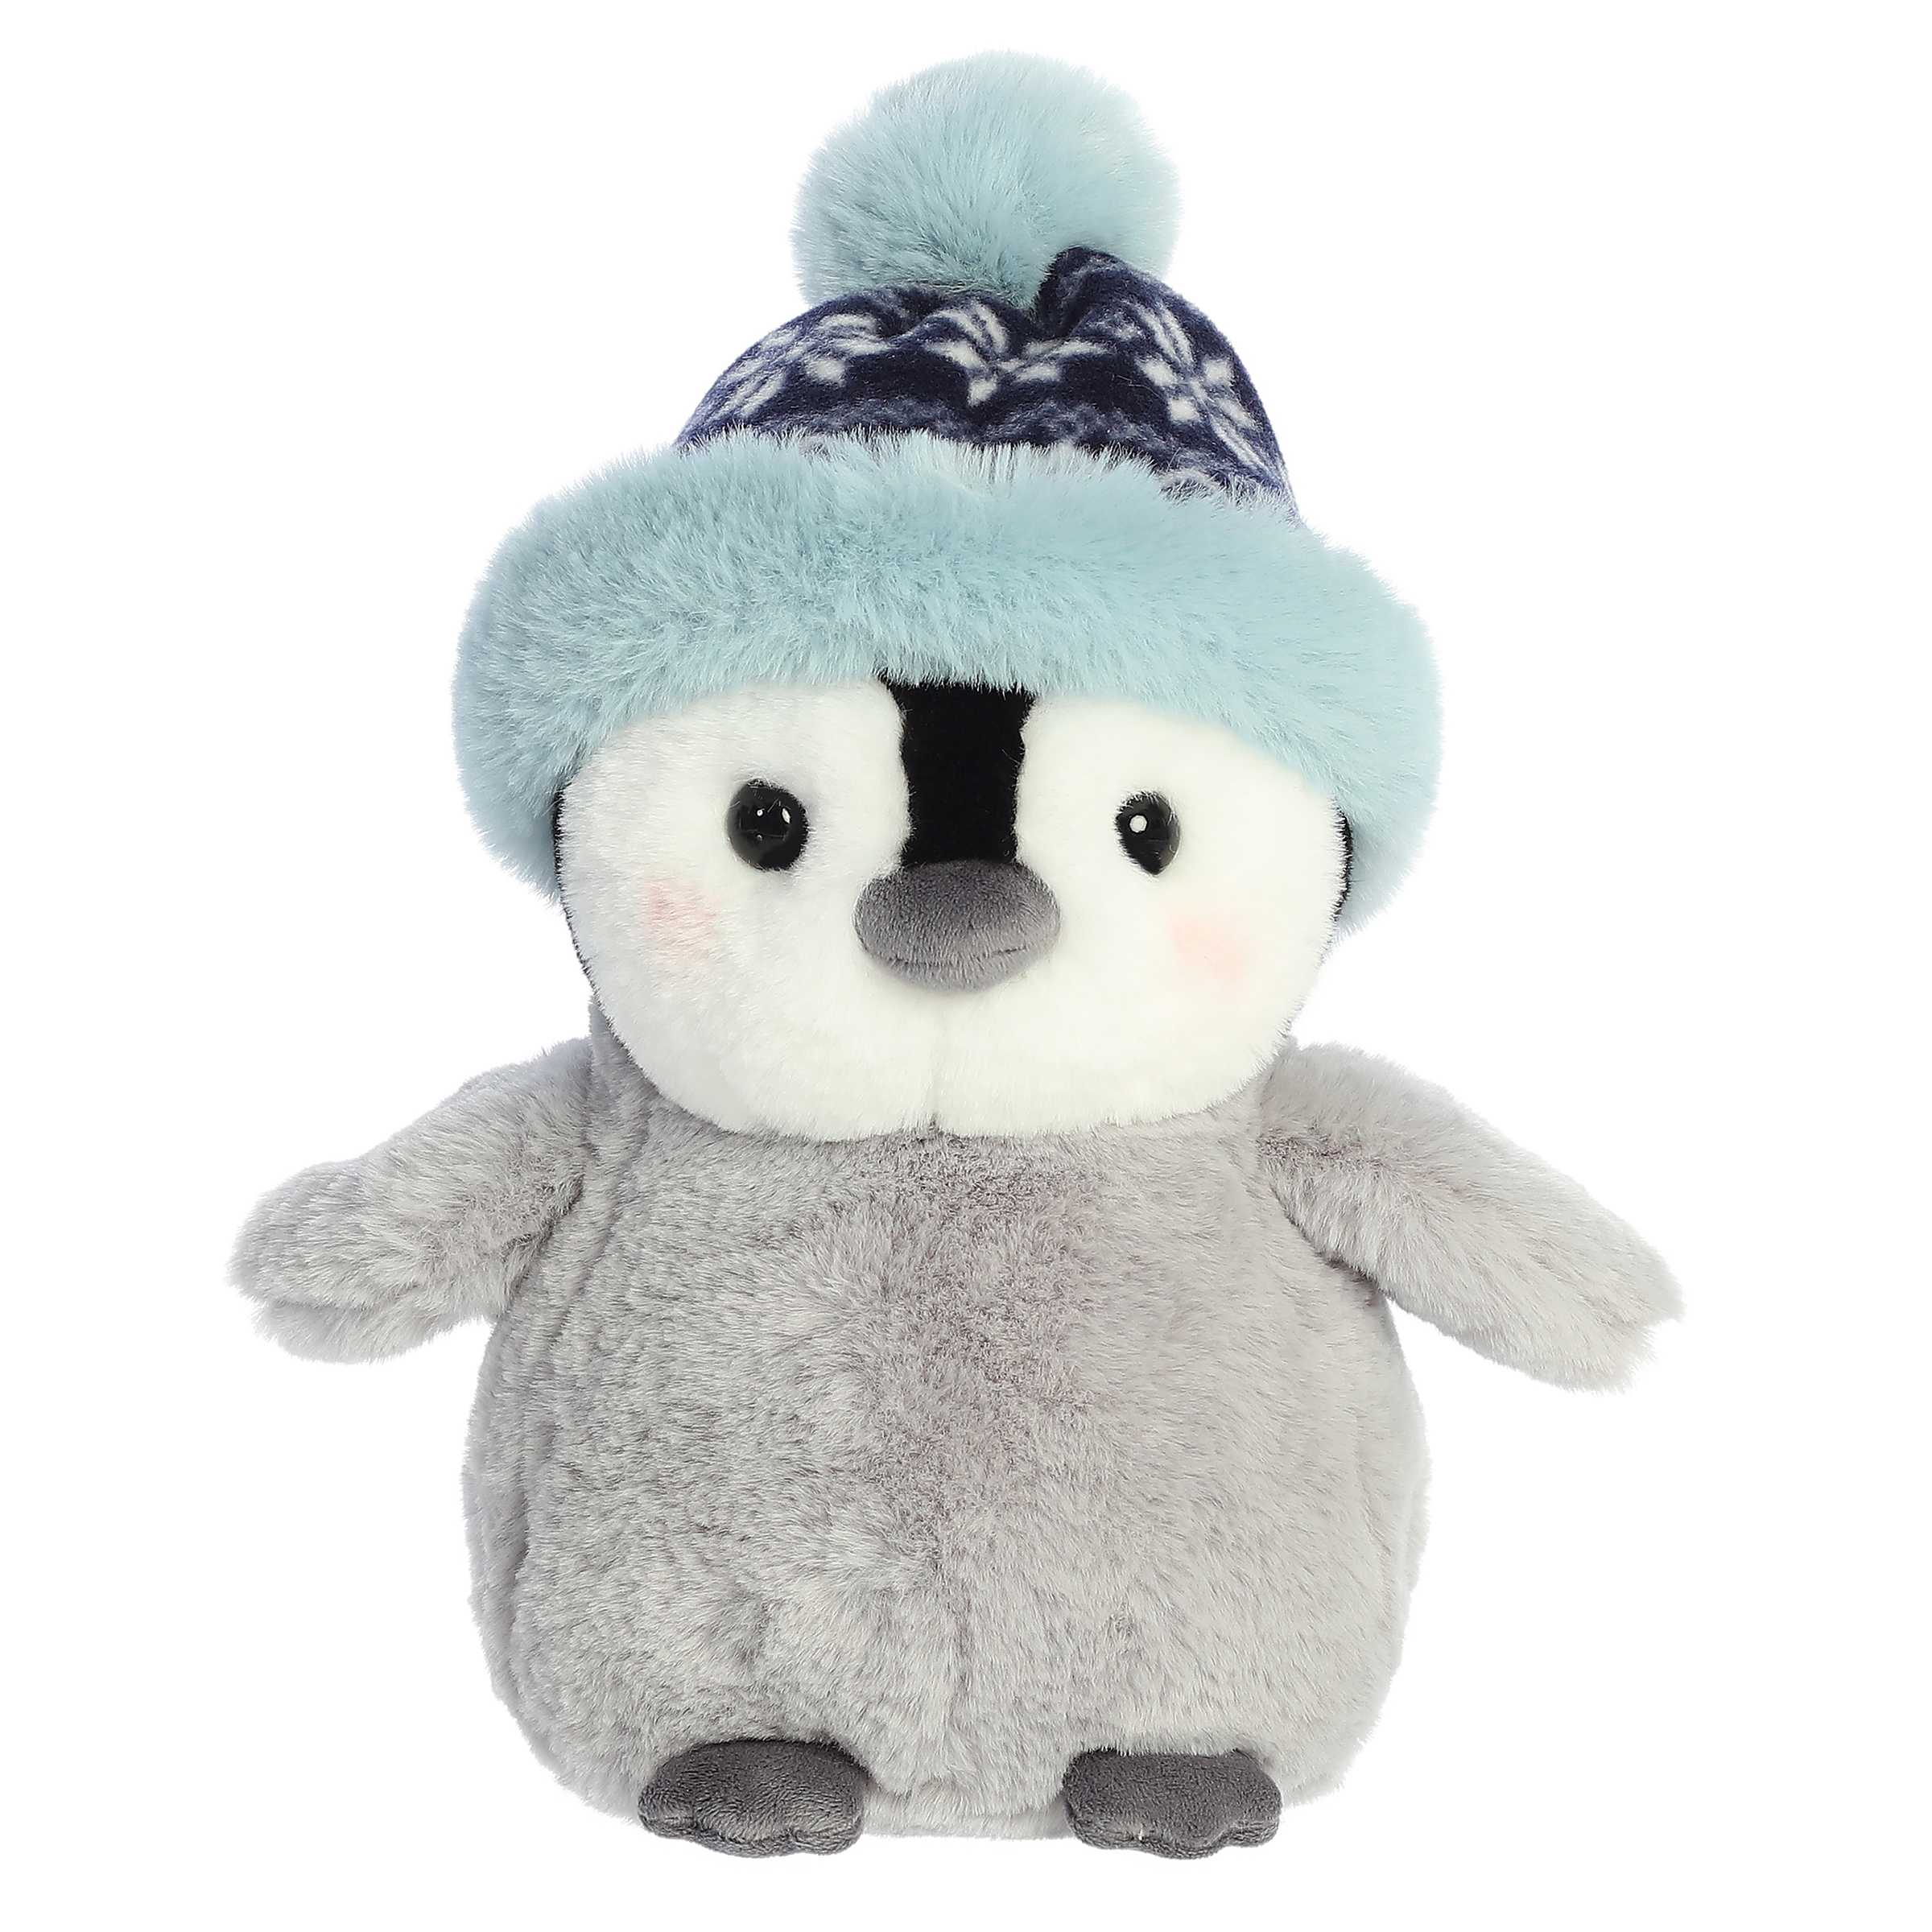 Adorable baby gray penguin chick stuffed animal with blushed cheeks wearing a blue winter beanie